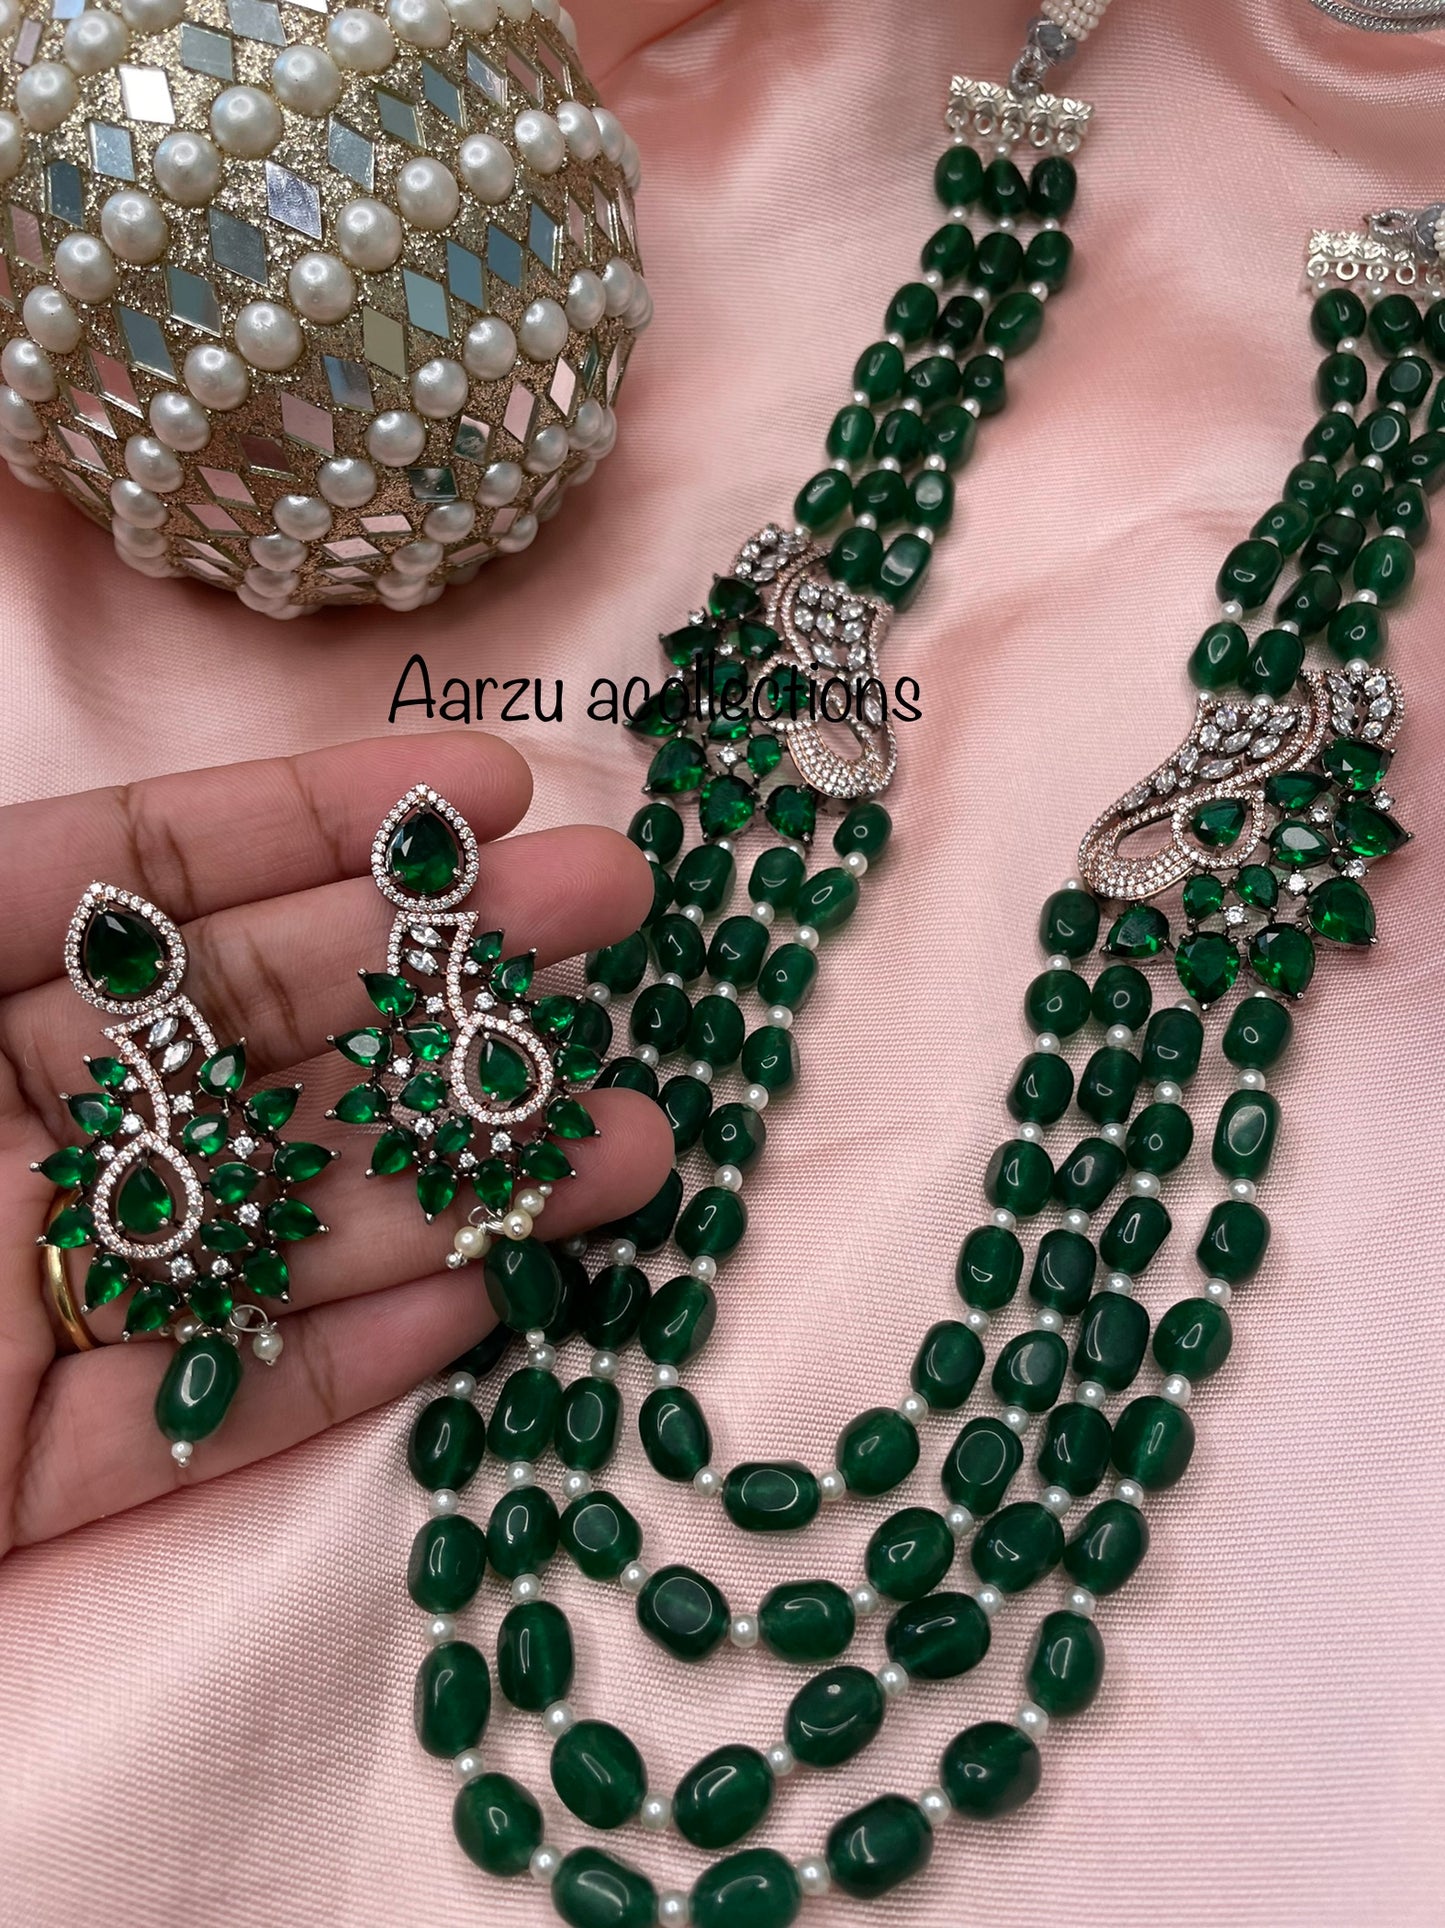 American Diamonds and Emerald glass beads Necklace and Earring Set